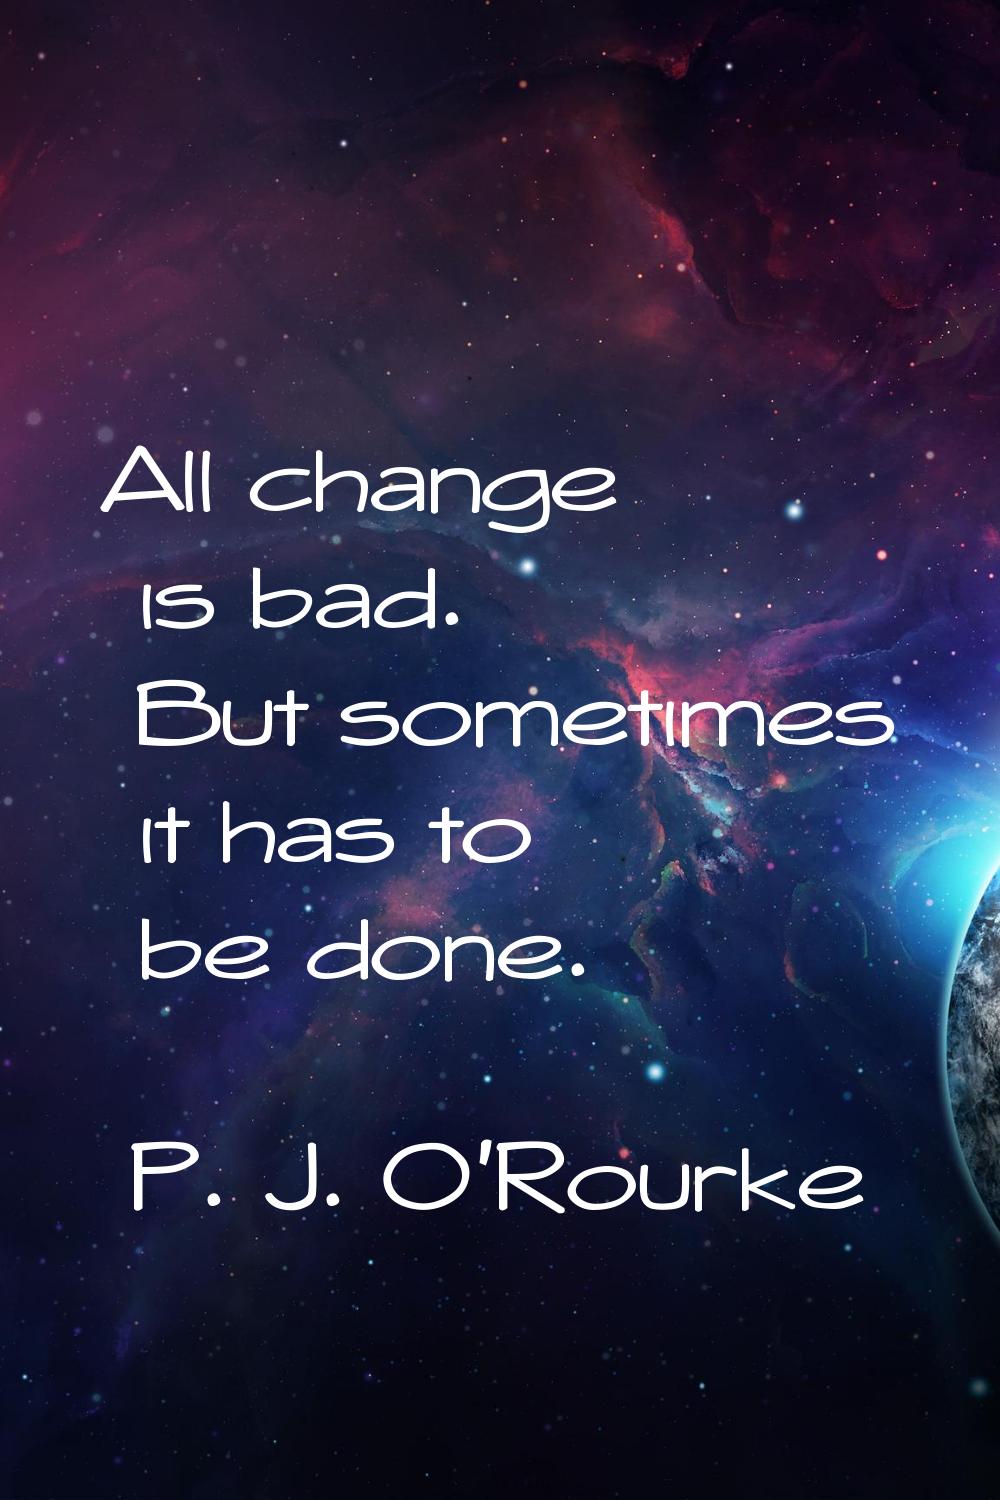 All change is bad. But sometimes it has to be done.